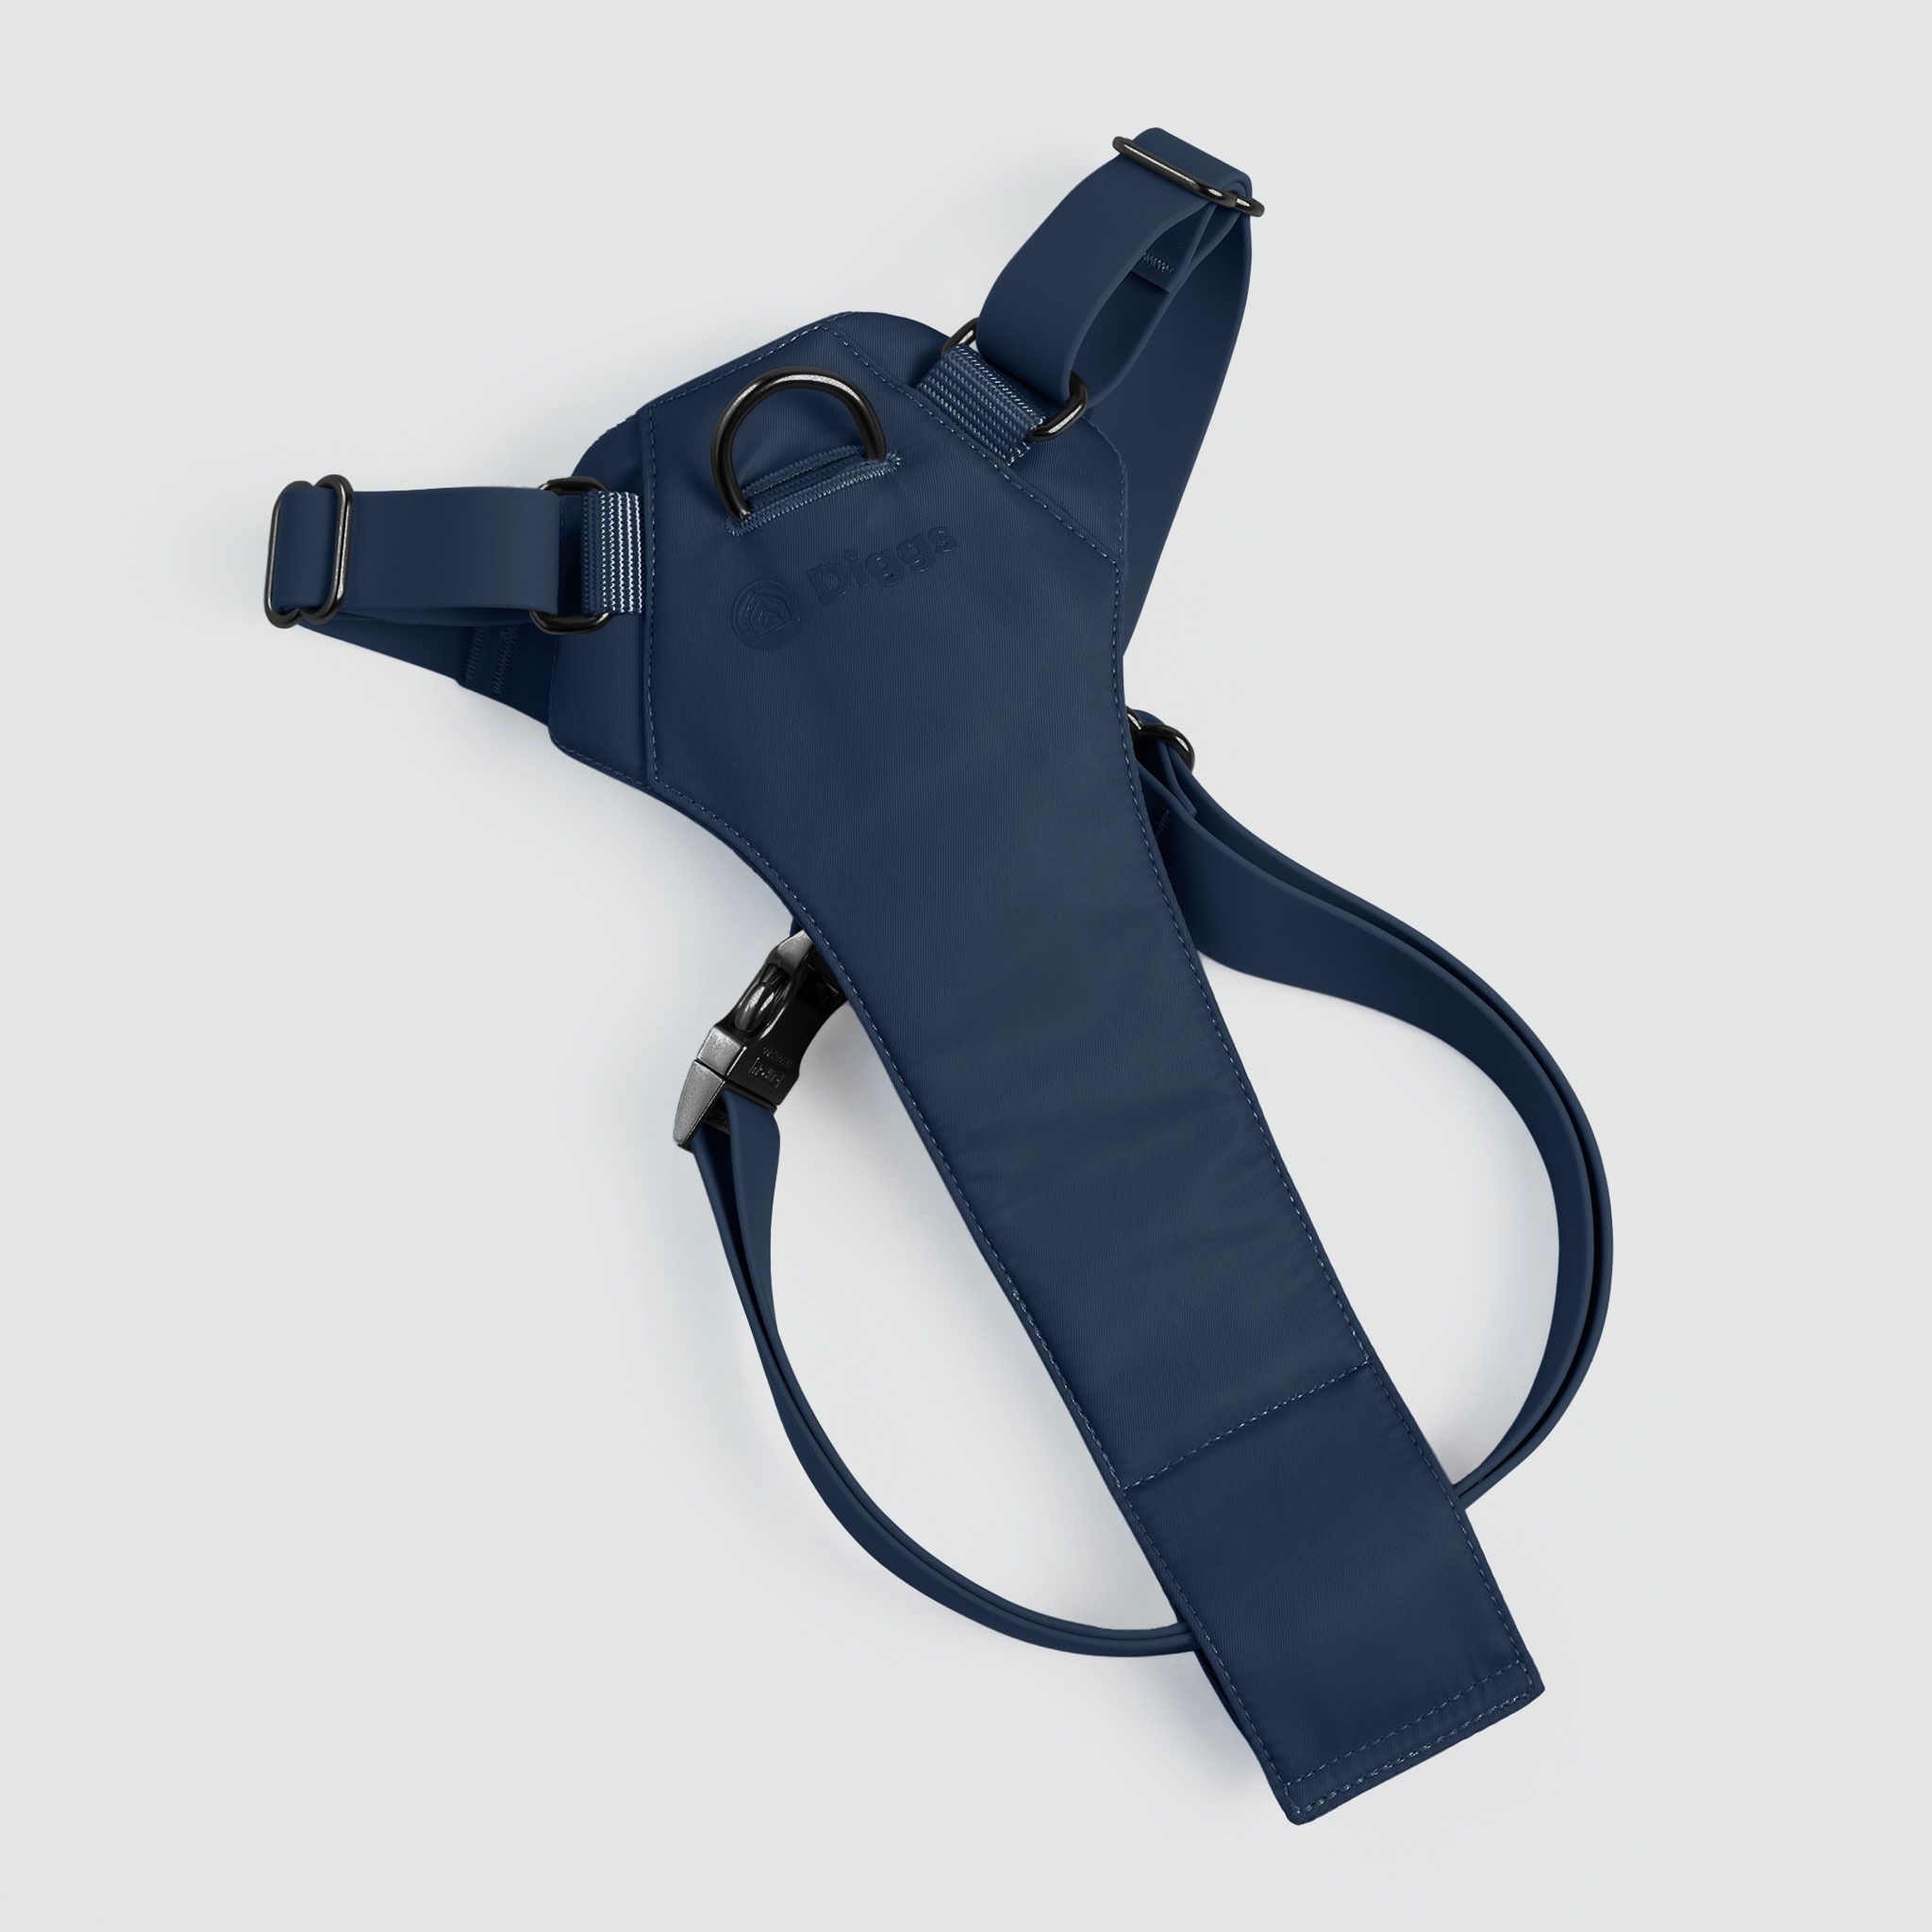 A blue harness on white background